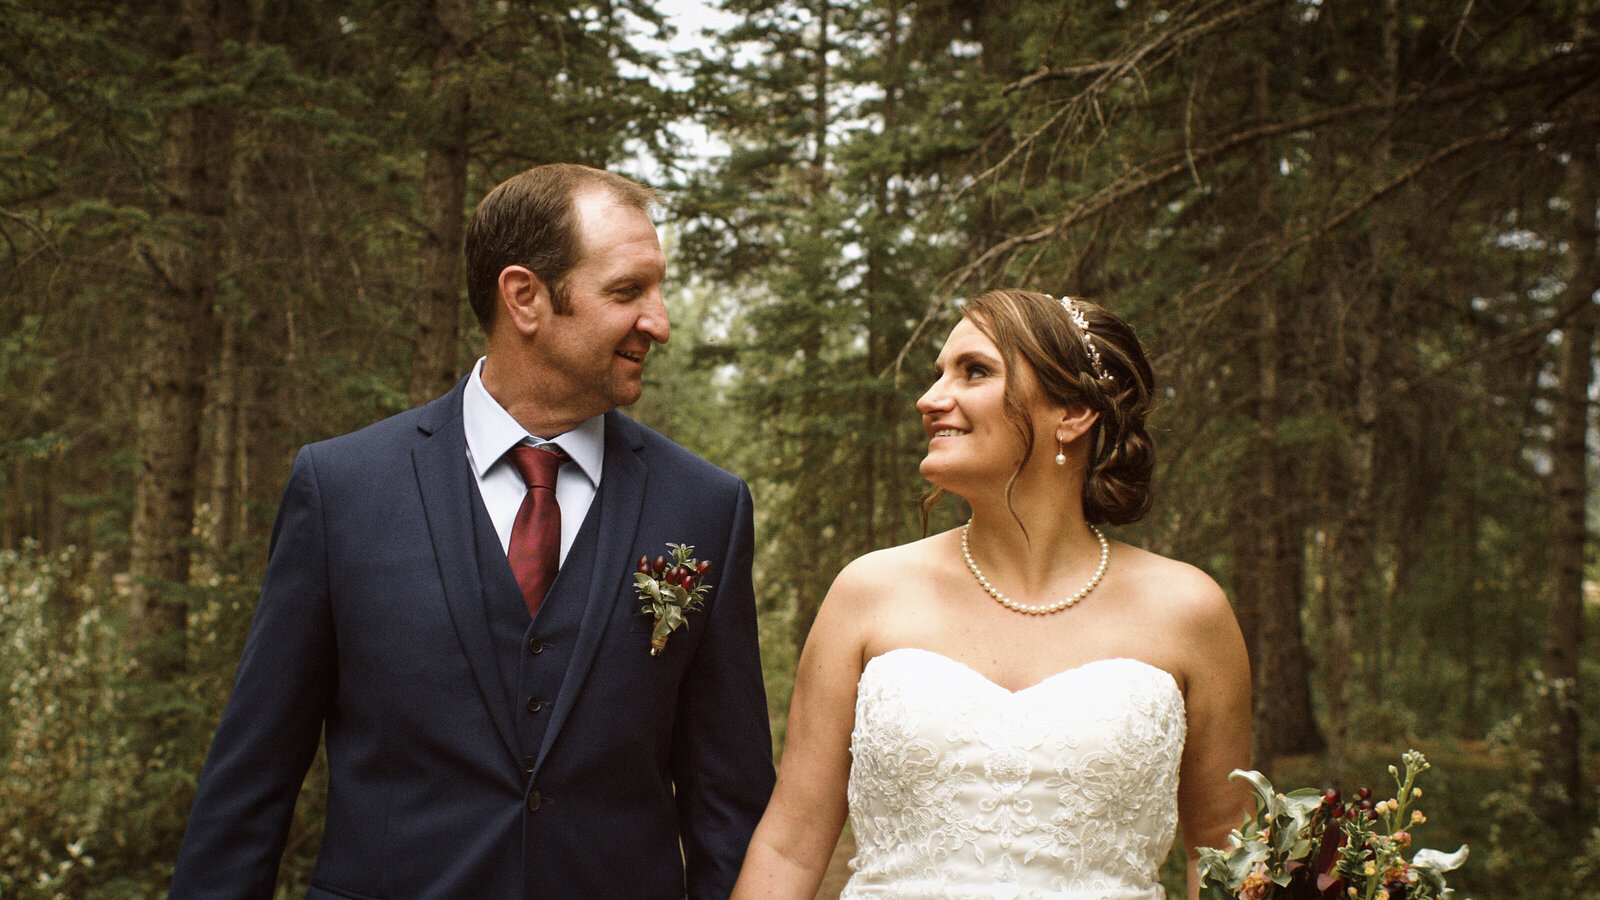 Couple walking down a trail during the filming of their wedding video in Canmore Alberta. Pictured smiling and enjoying their wedding day